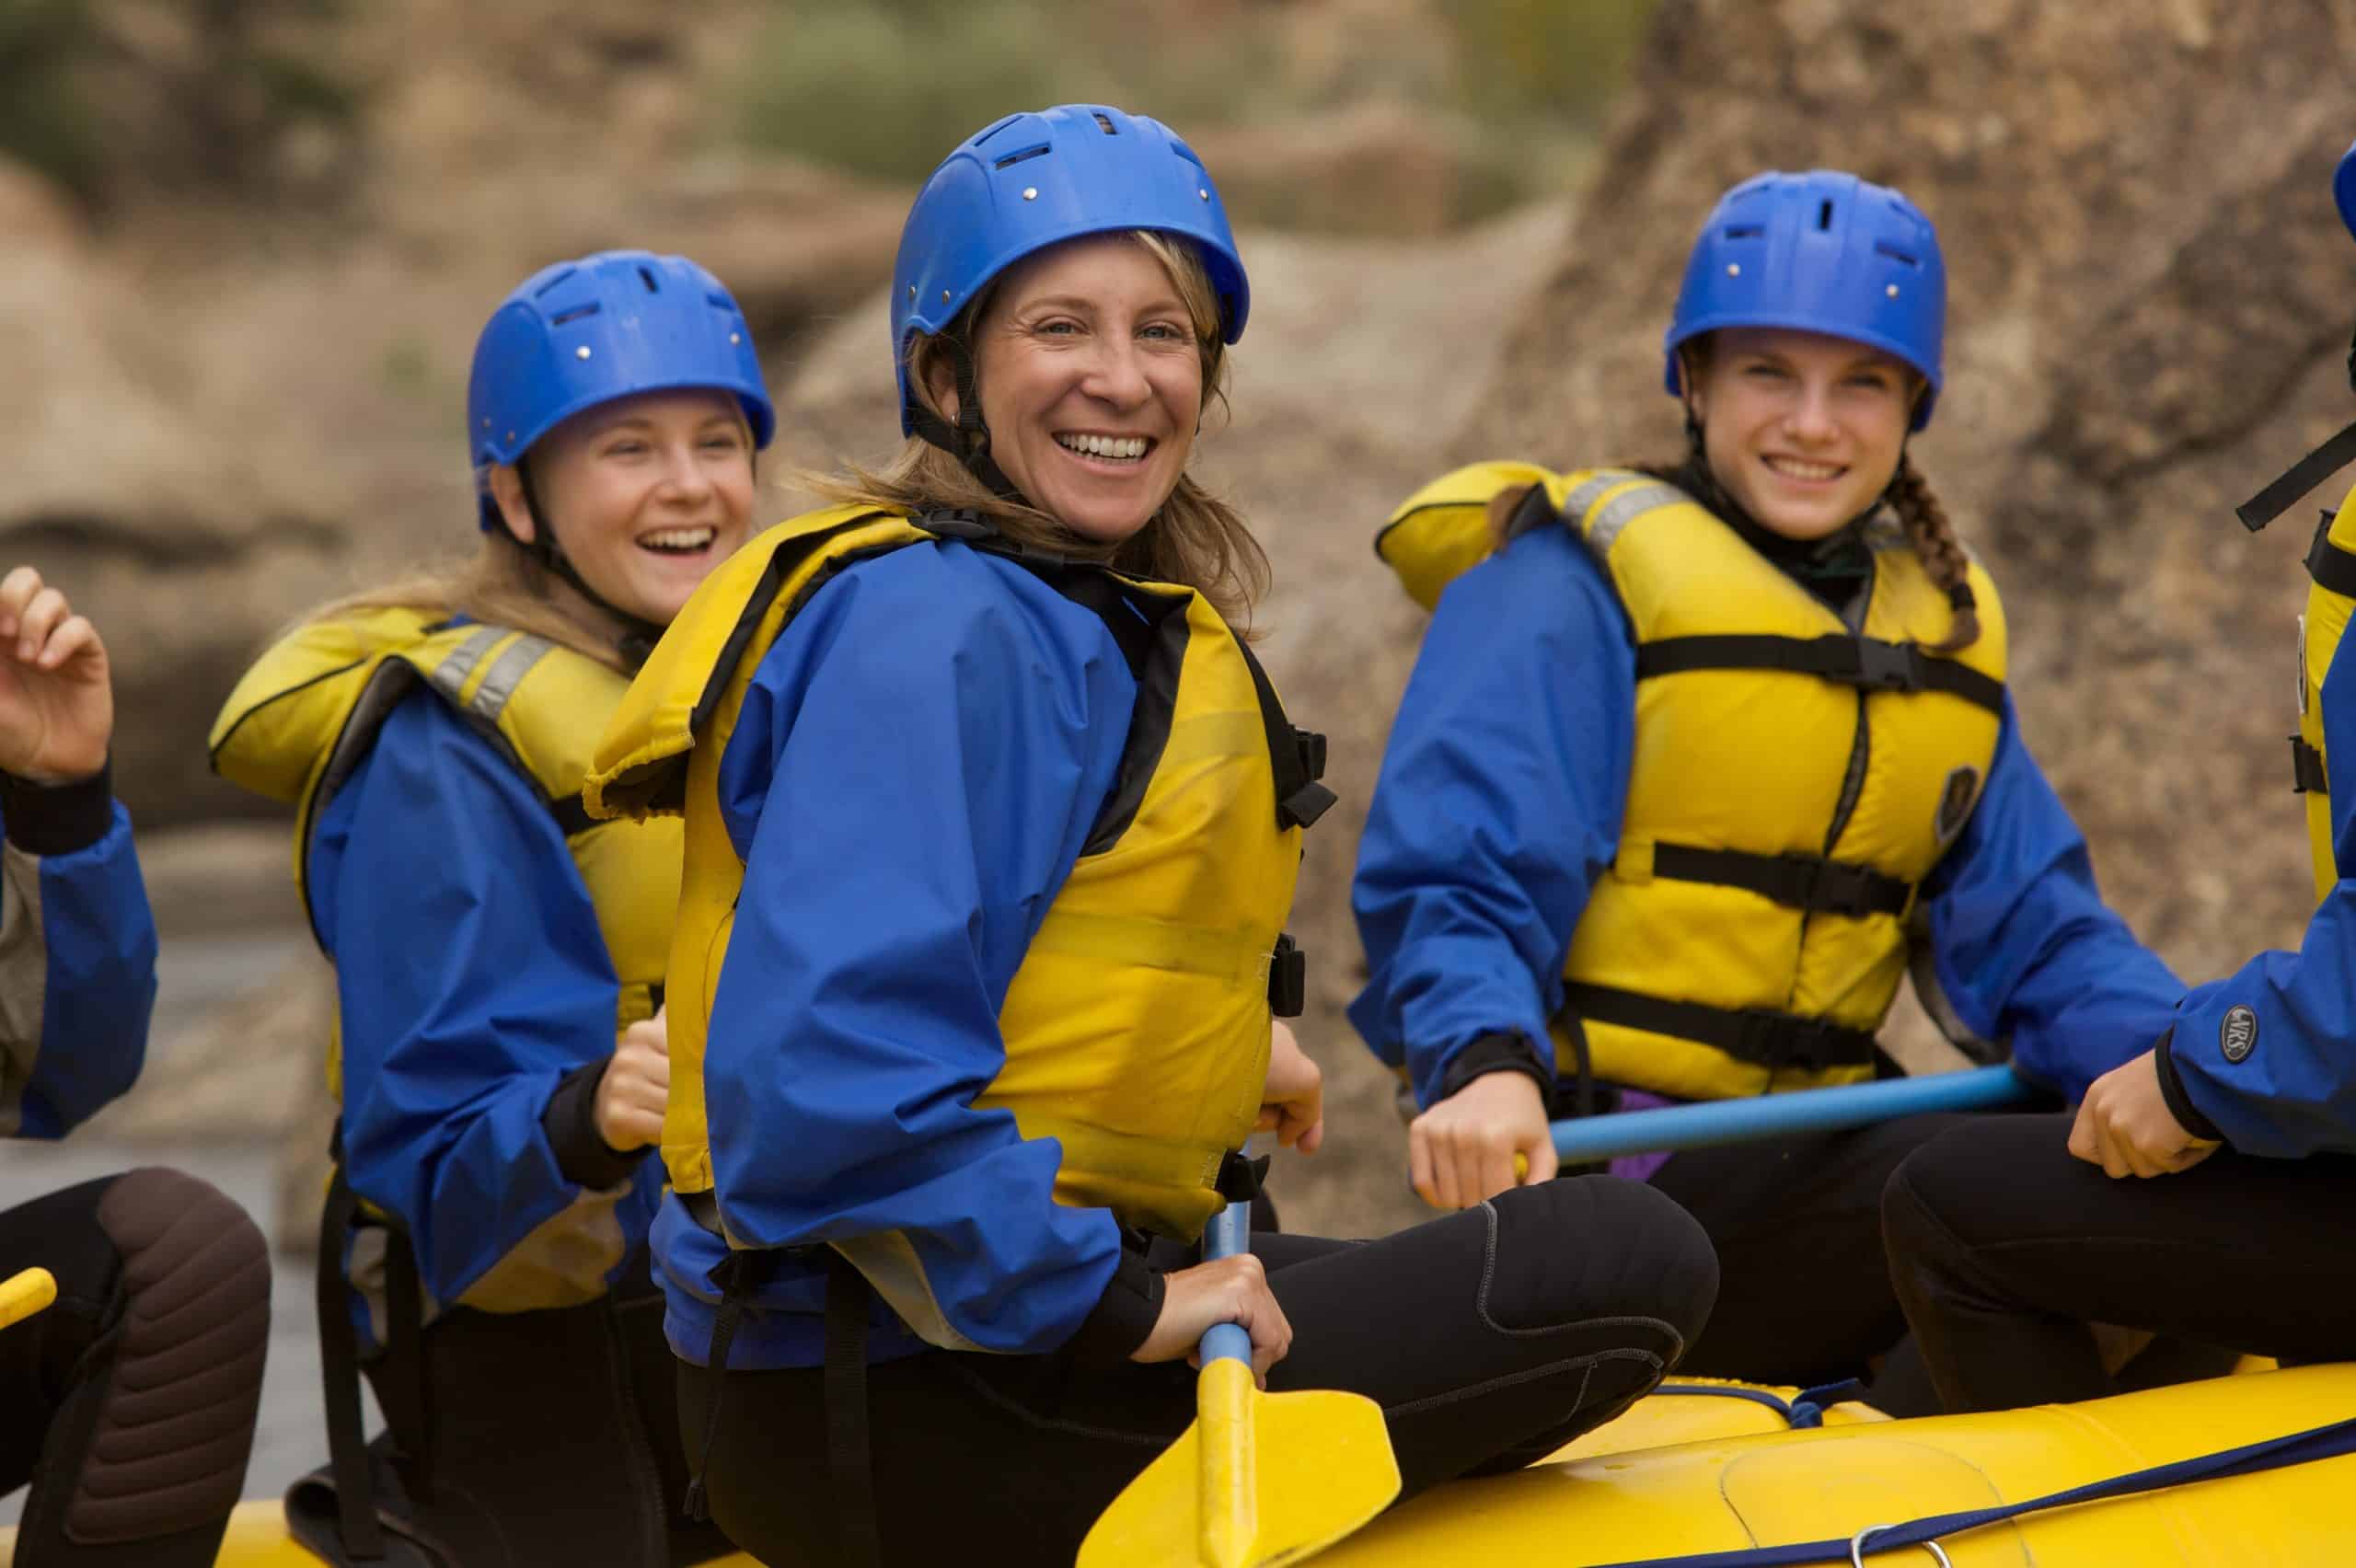 Whitewater Rafting Safety